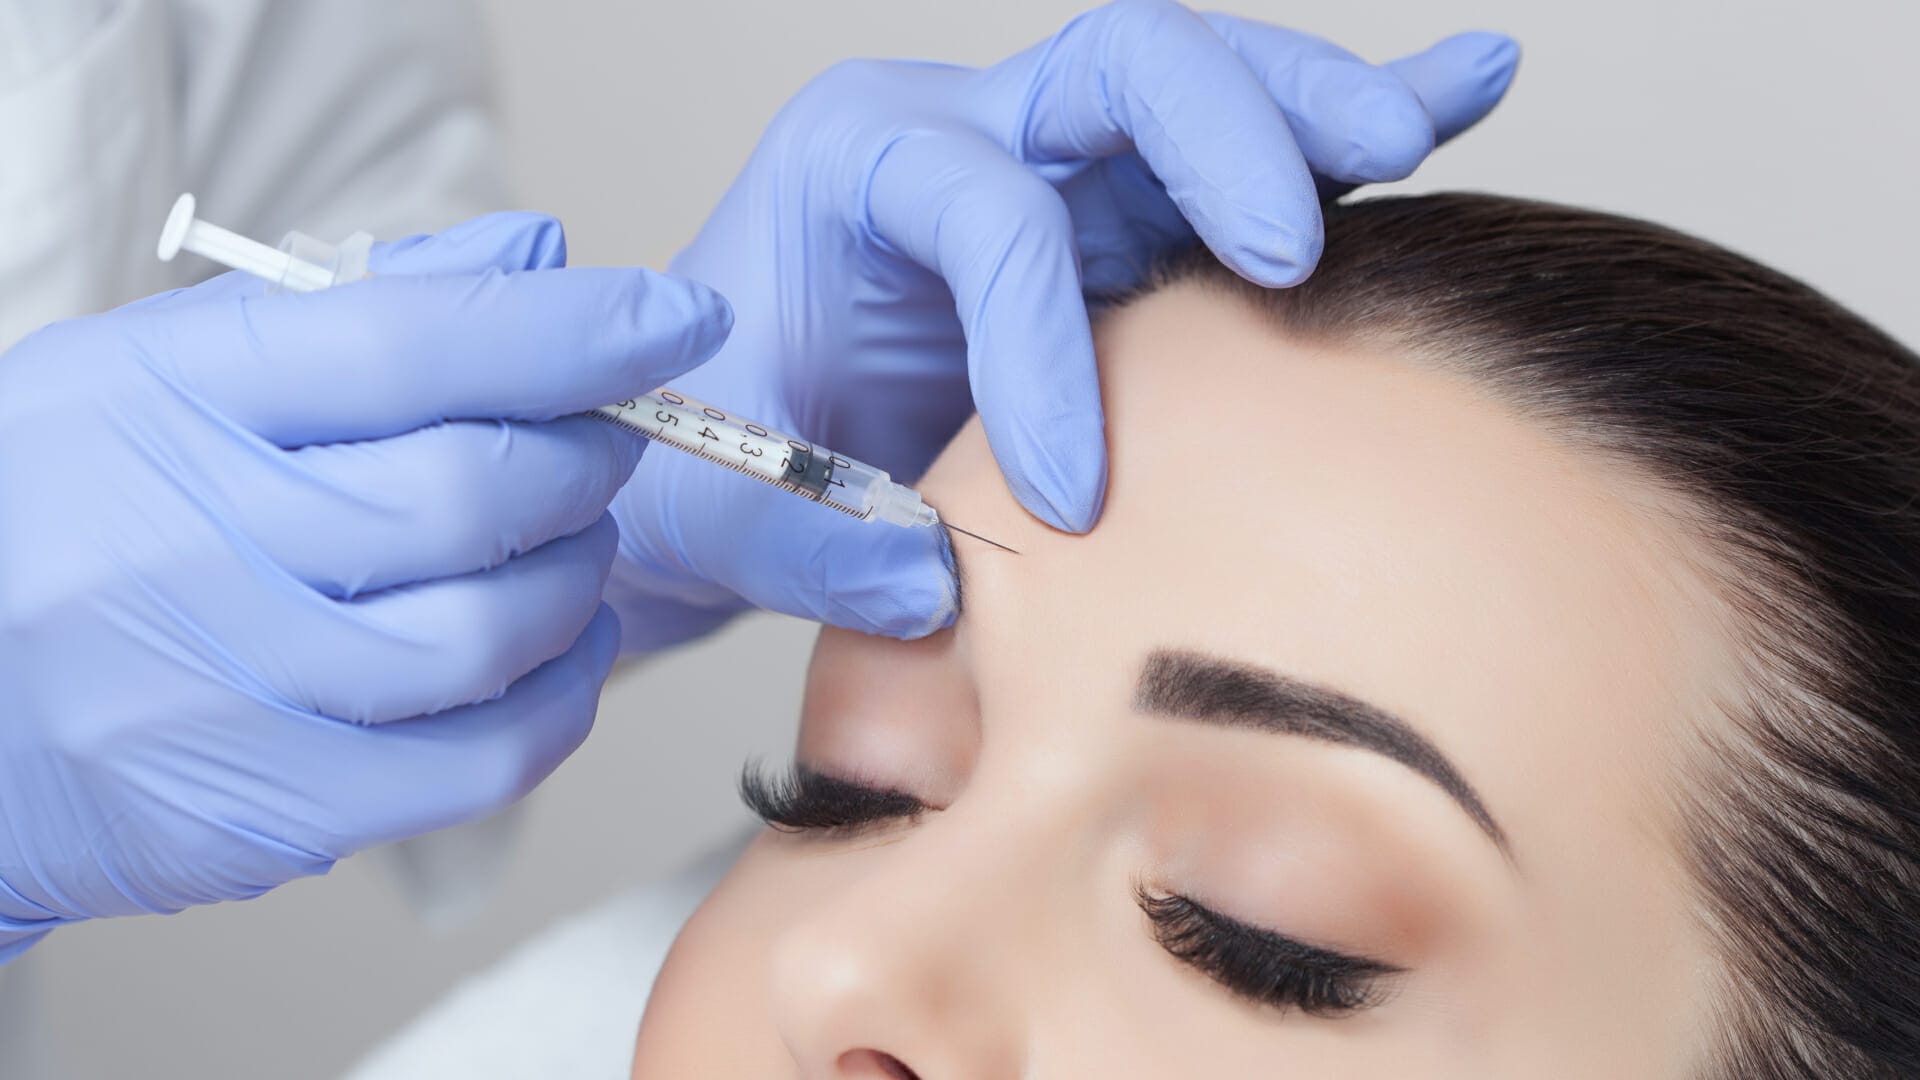 A cosmetologist gives a facial botox injection for tightening and smoothing wrinkles on the face and skin of a beautiful young woman in a skin clinic.